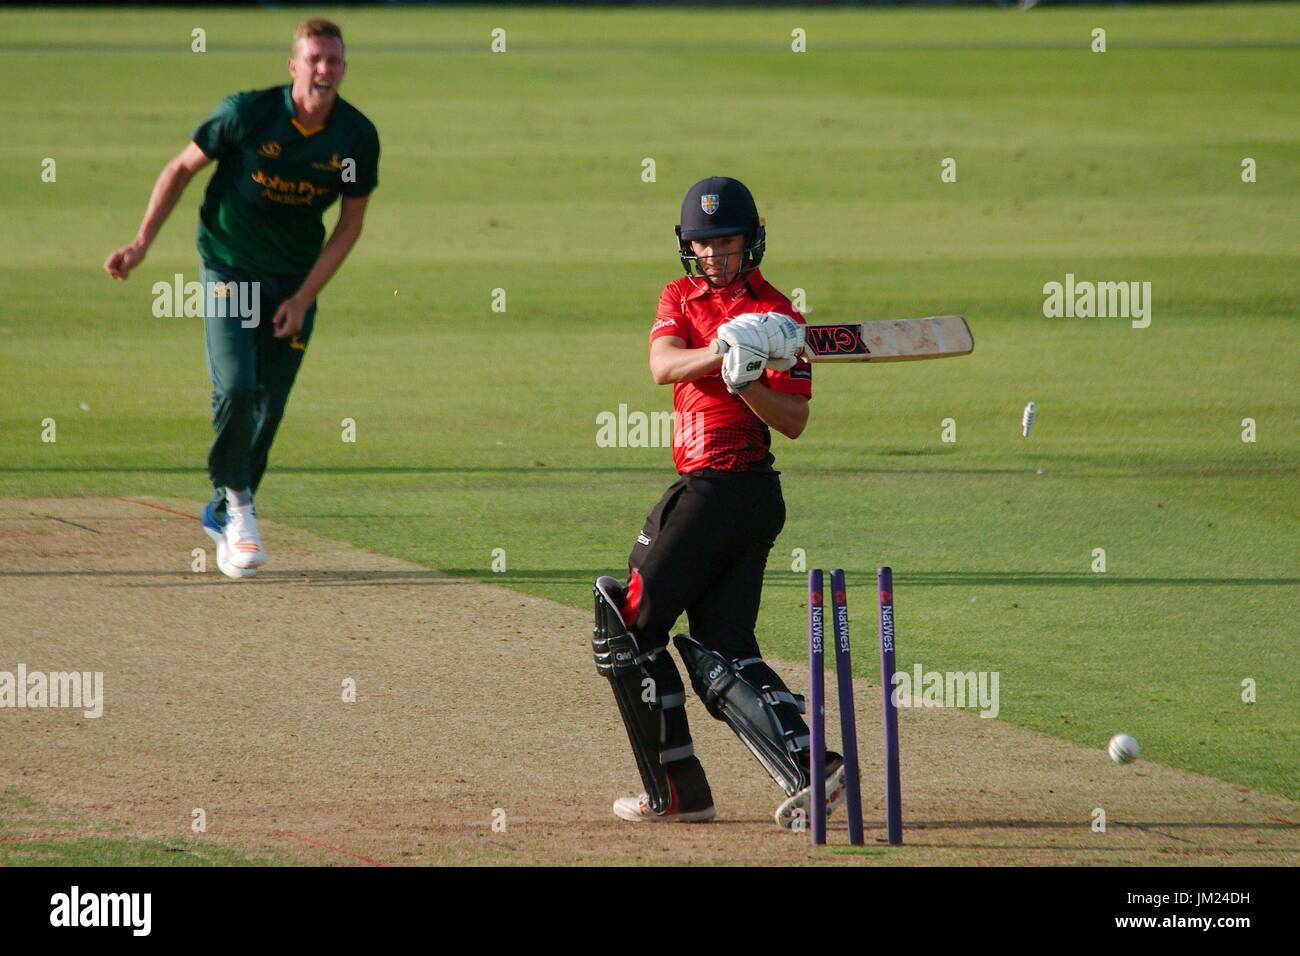 Chester le Street, England, 25th July 2017. Michael Richardson of Durham Jets is bowled by Jake Ball of Nottinghamshire Outlaws in their NatWest T20 match at the Emirates, Chester le Street. Credit: Colin Edwards/Alamy Live News. Stock Photo